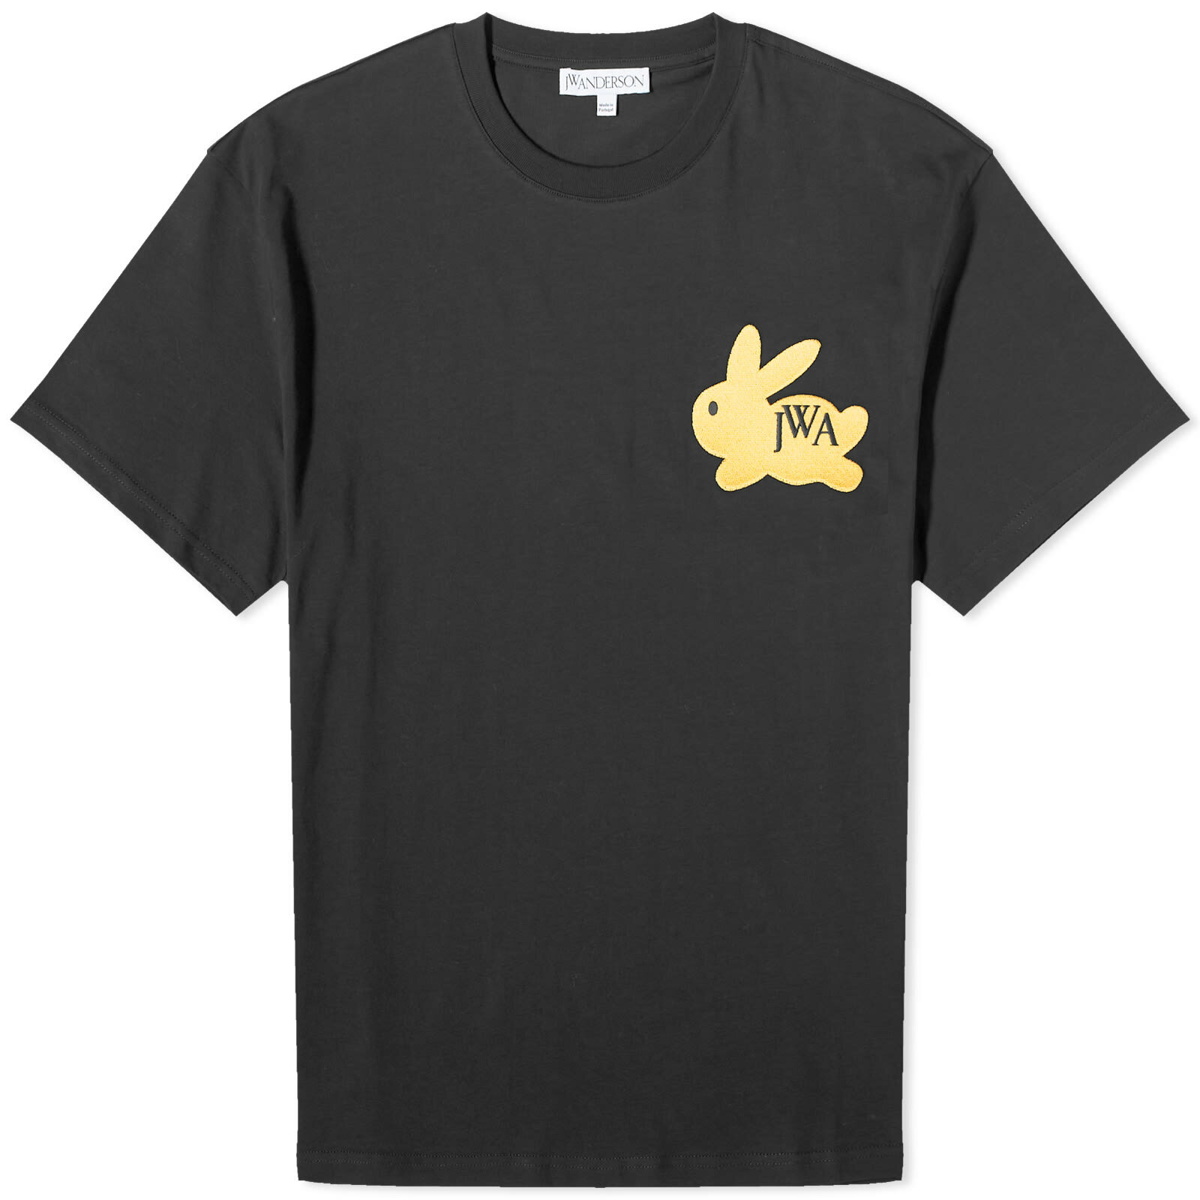 JW Anderson Men's Embroidered Bunny T-Shirt in Black JW Anderson